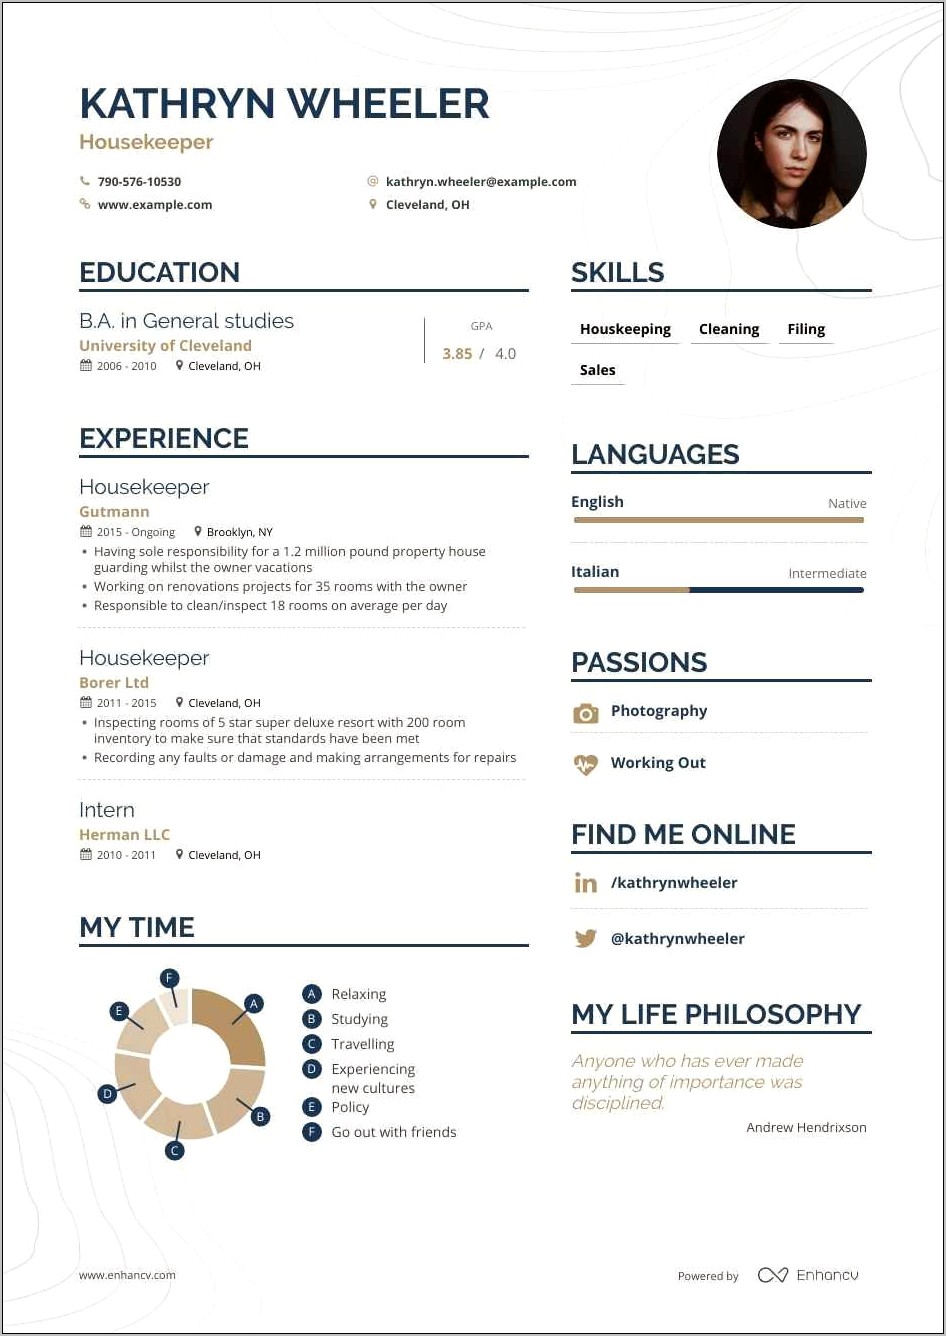 Sample Resume Of A Housekeeper For Hotels